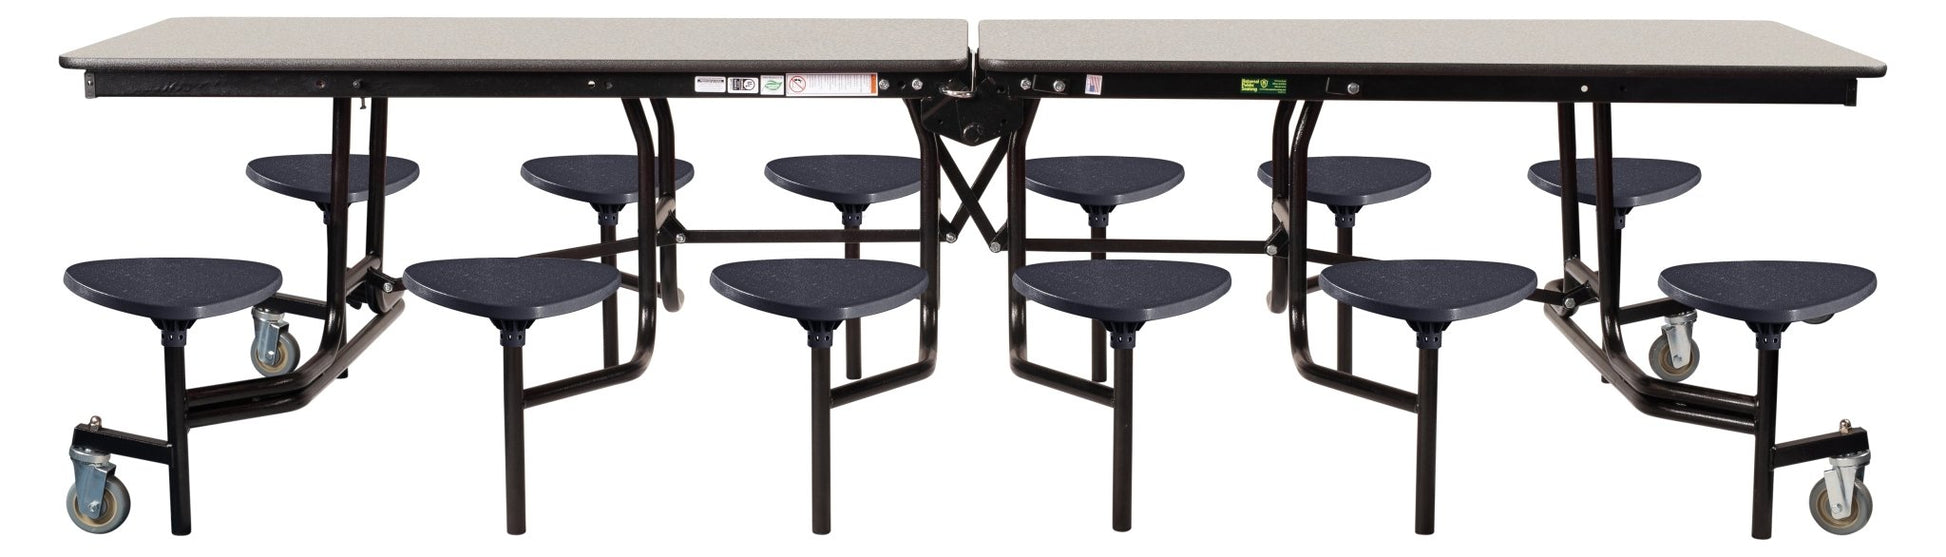 Mobile Cafeteria Lunchroom Stool Table - 30" W x 12' L - 12 Stools - Particleboard Core - T-Molding Edge - Chrome Frame - SchoolOutlet